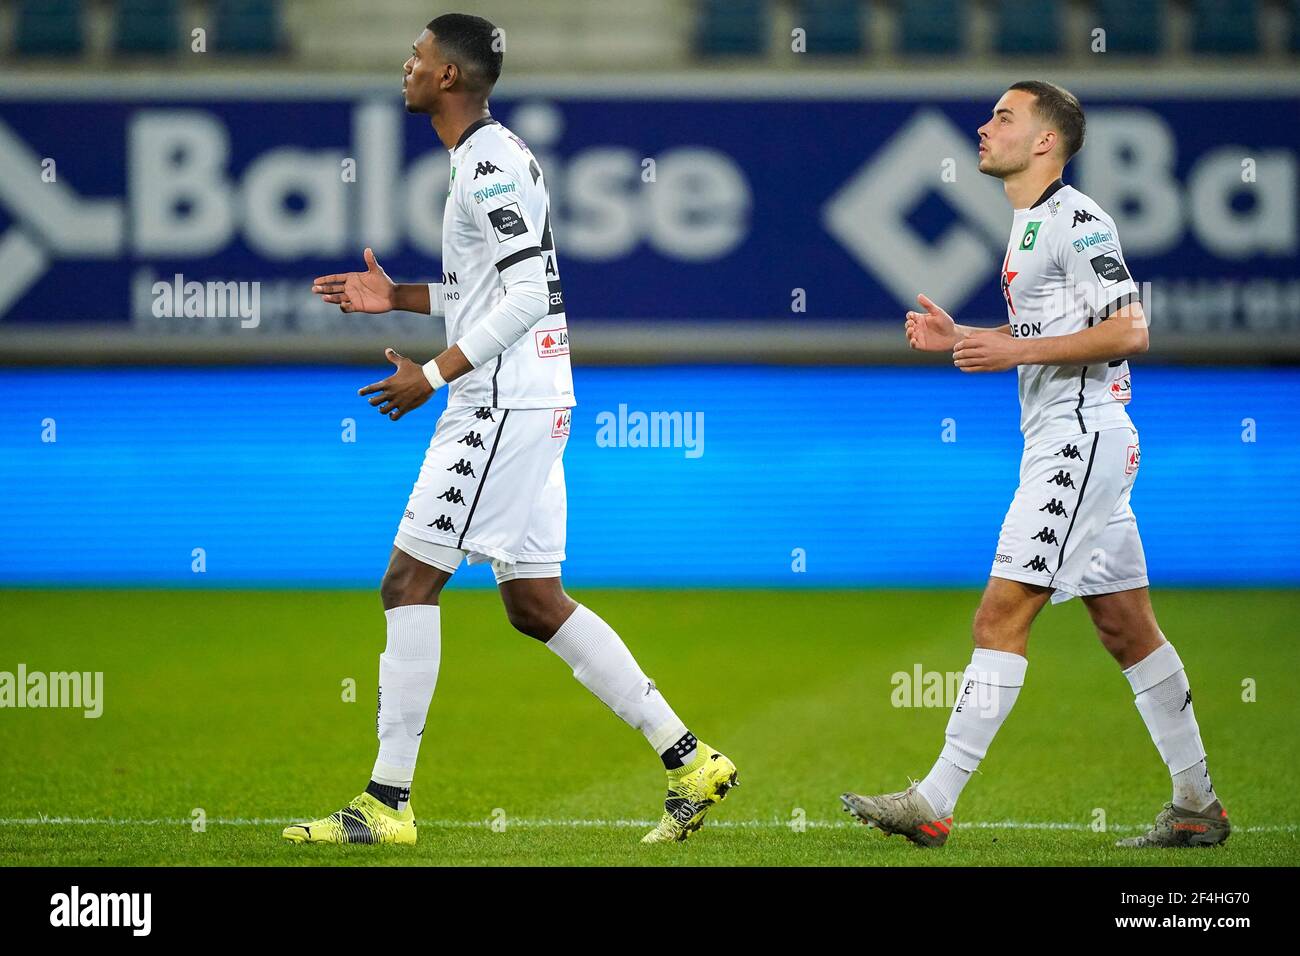 GENT, BELGIUM - MARCH 21: Jean Harisson Marcelin of Cercle Brugge during  the Jupiler Pro League match between KAA Gent and Cercle Brugge at Ghelamco  Arena on March 21, 2021 in Gent,